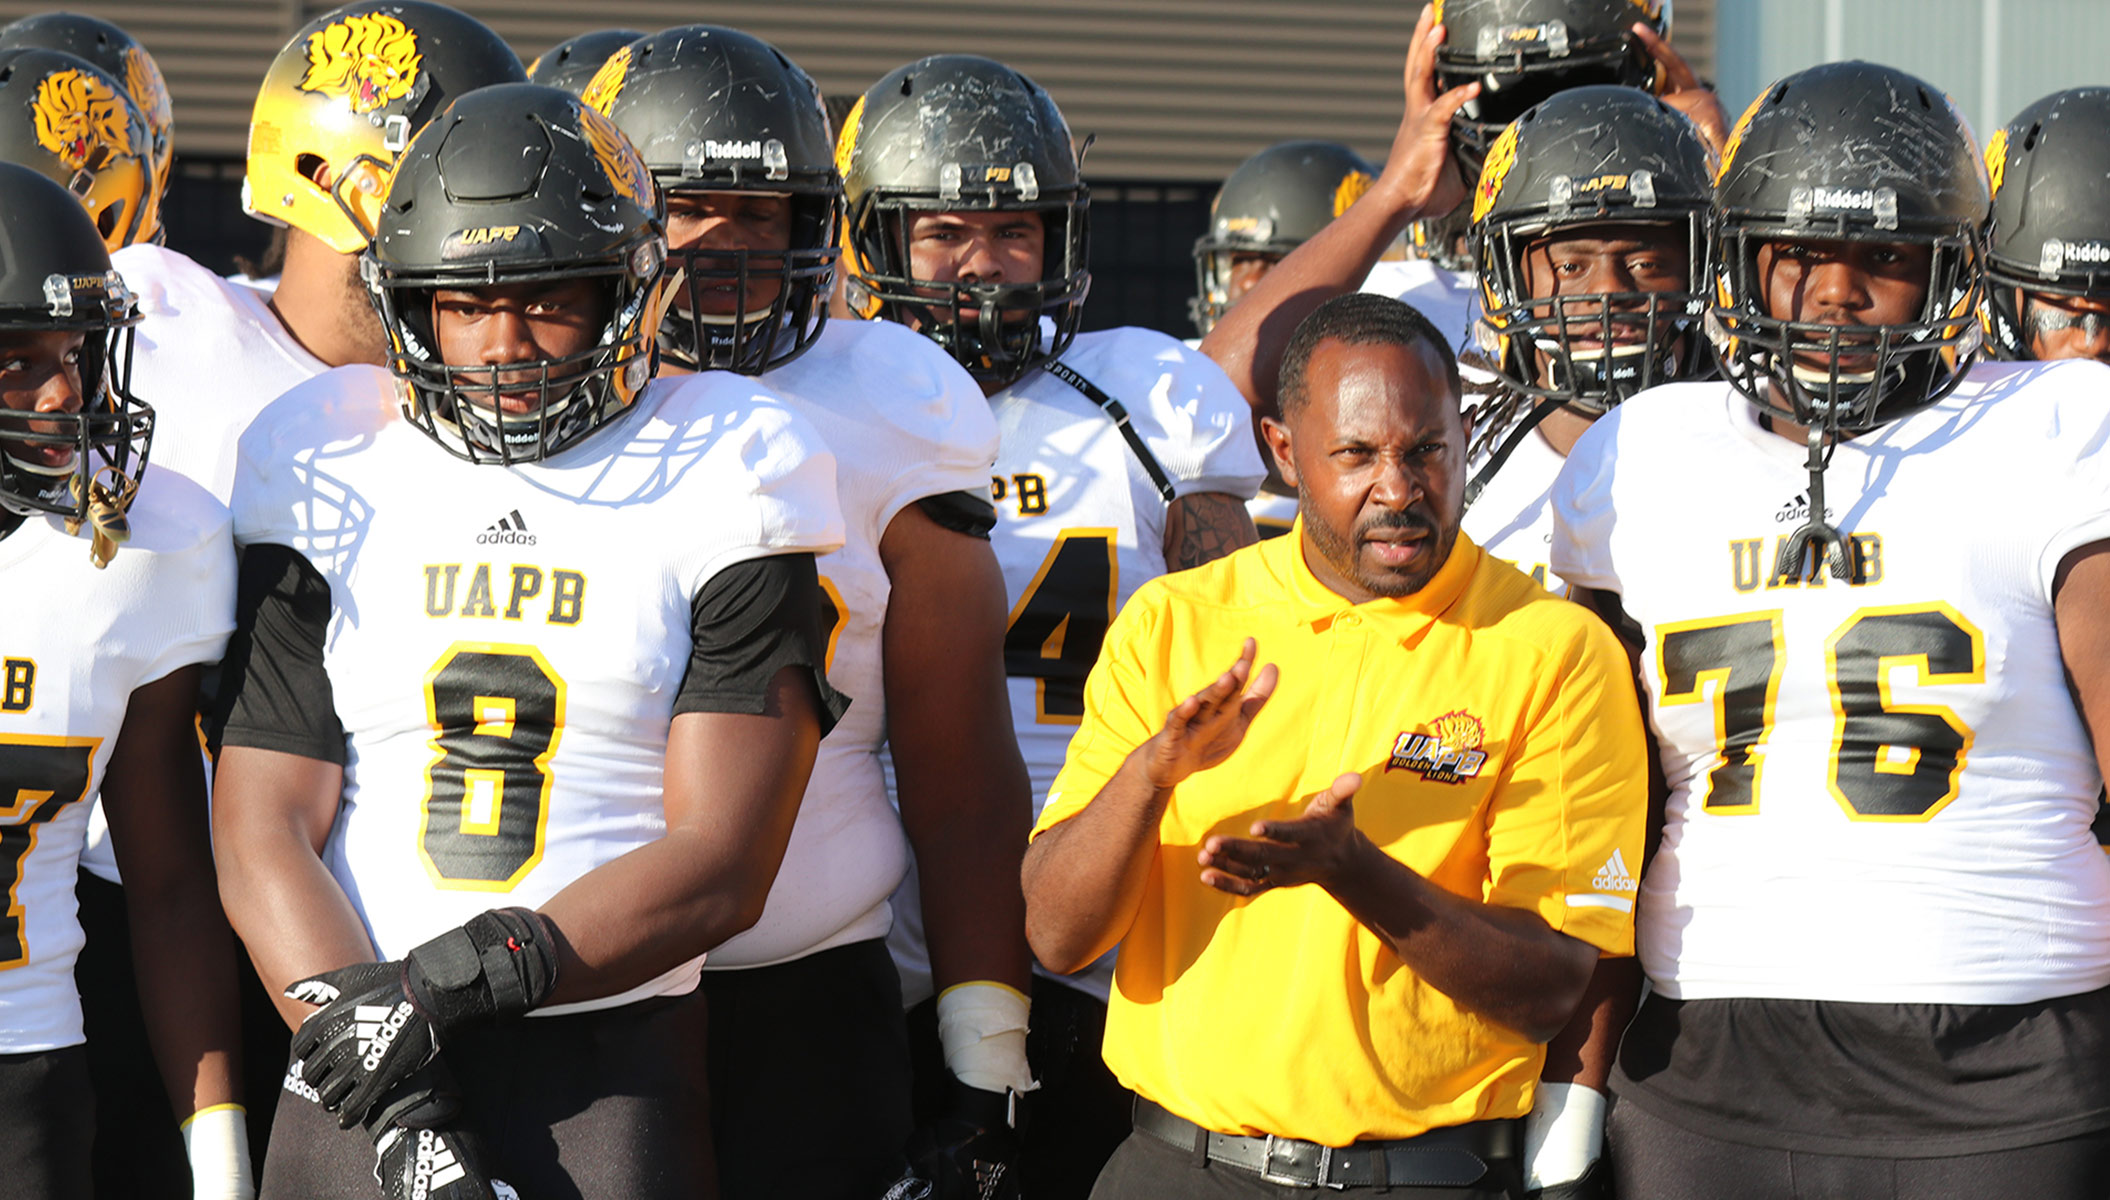 MikeCheck: Picked in preseason to finish last, Arkansas-Pine Bluff now poised to turn SWAC upside down